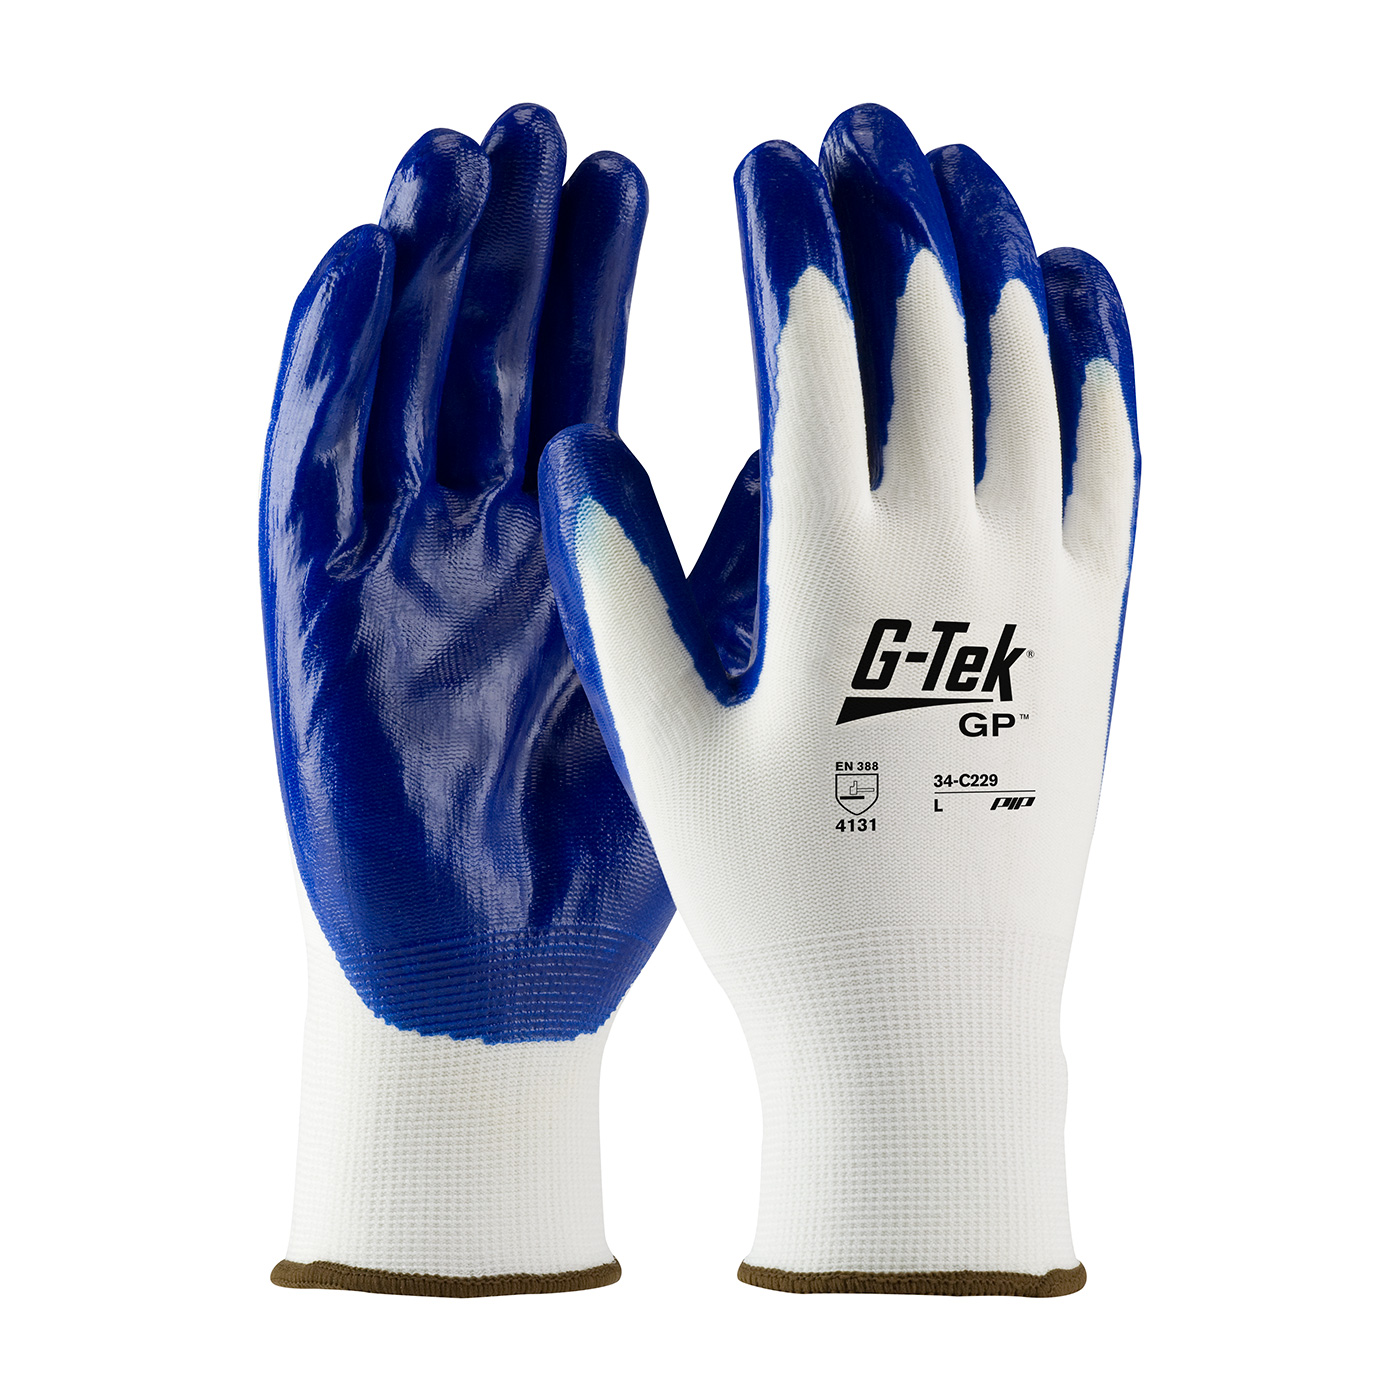 PIP® G-Tek® GP™ Seamless Knit Nylon Glove with Nitrile Coated Smooth Grip on Palm & Fingers #34-C229